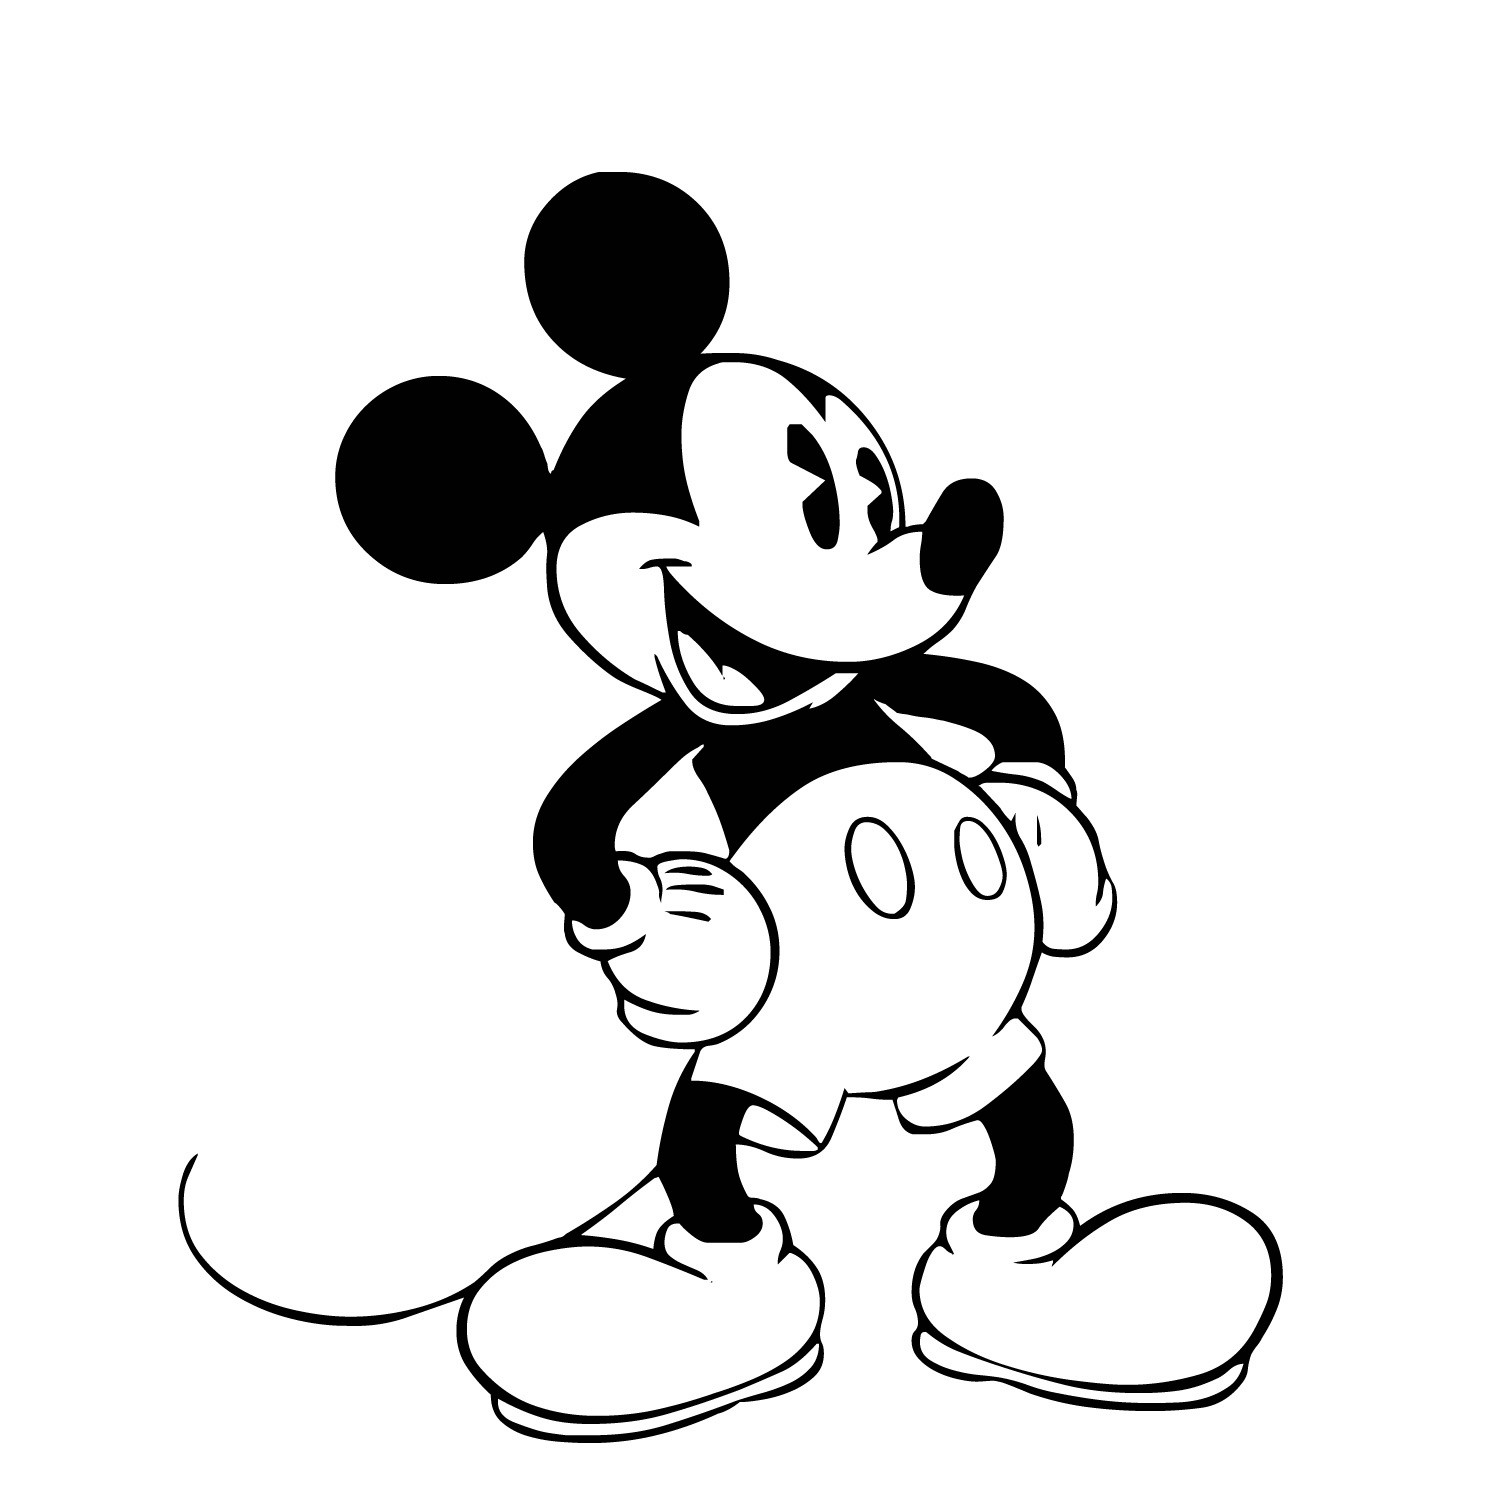 Pictures of mickey mouse . - Mickey Mouse Clipart Black And White